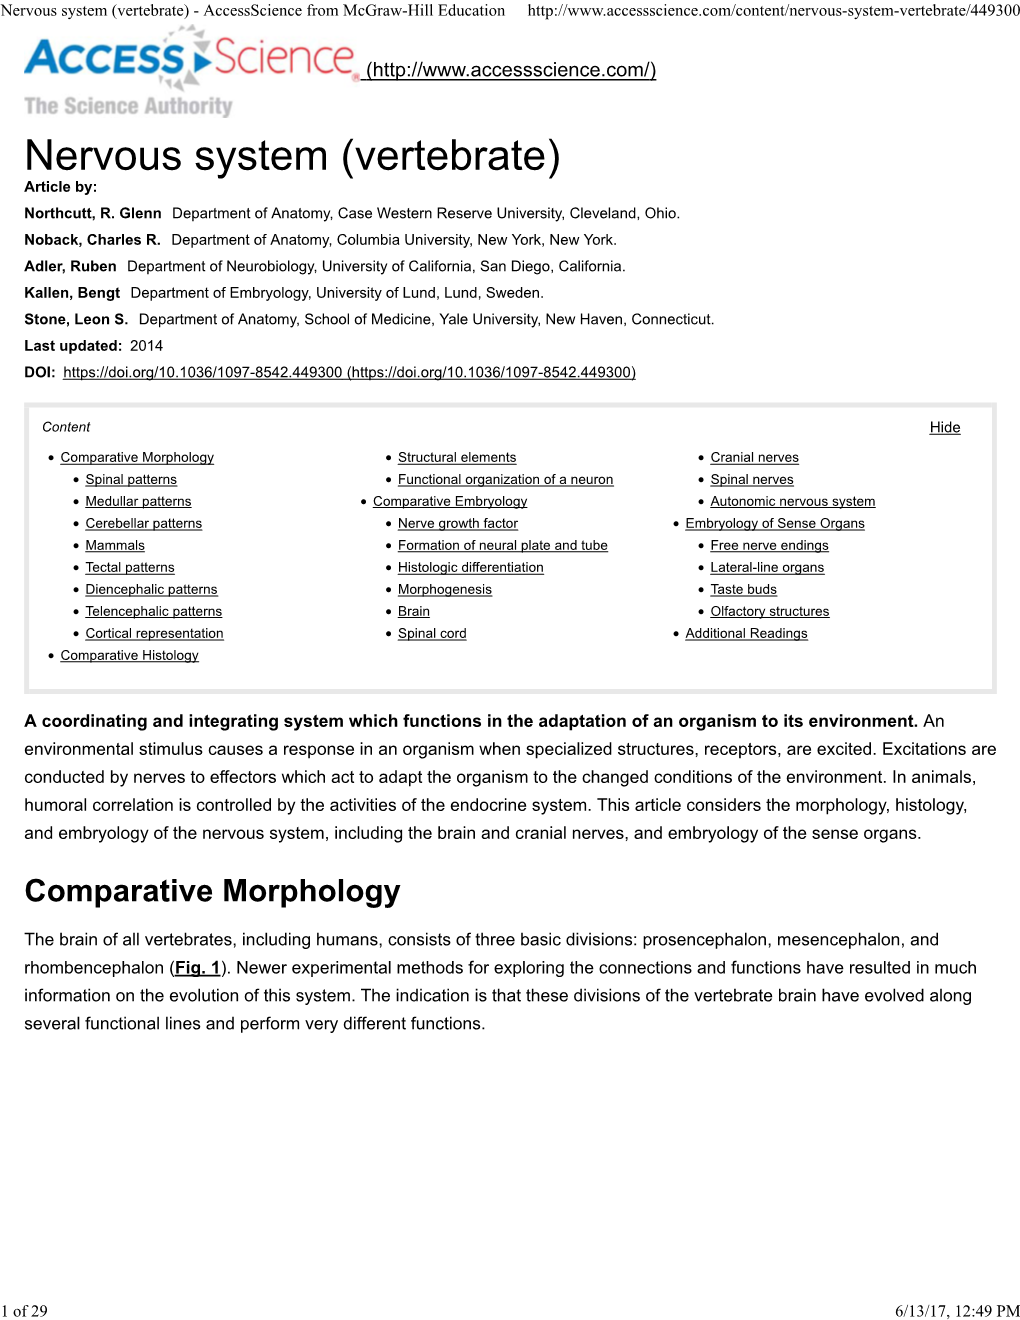 Nervous System (Vertebrate) - Accessscience from Mcgraw-Hill Education